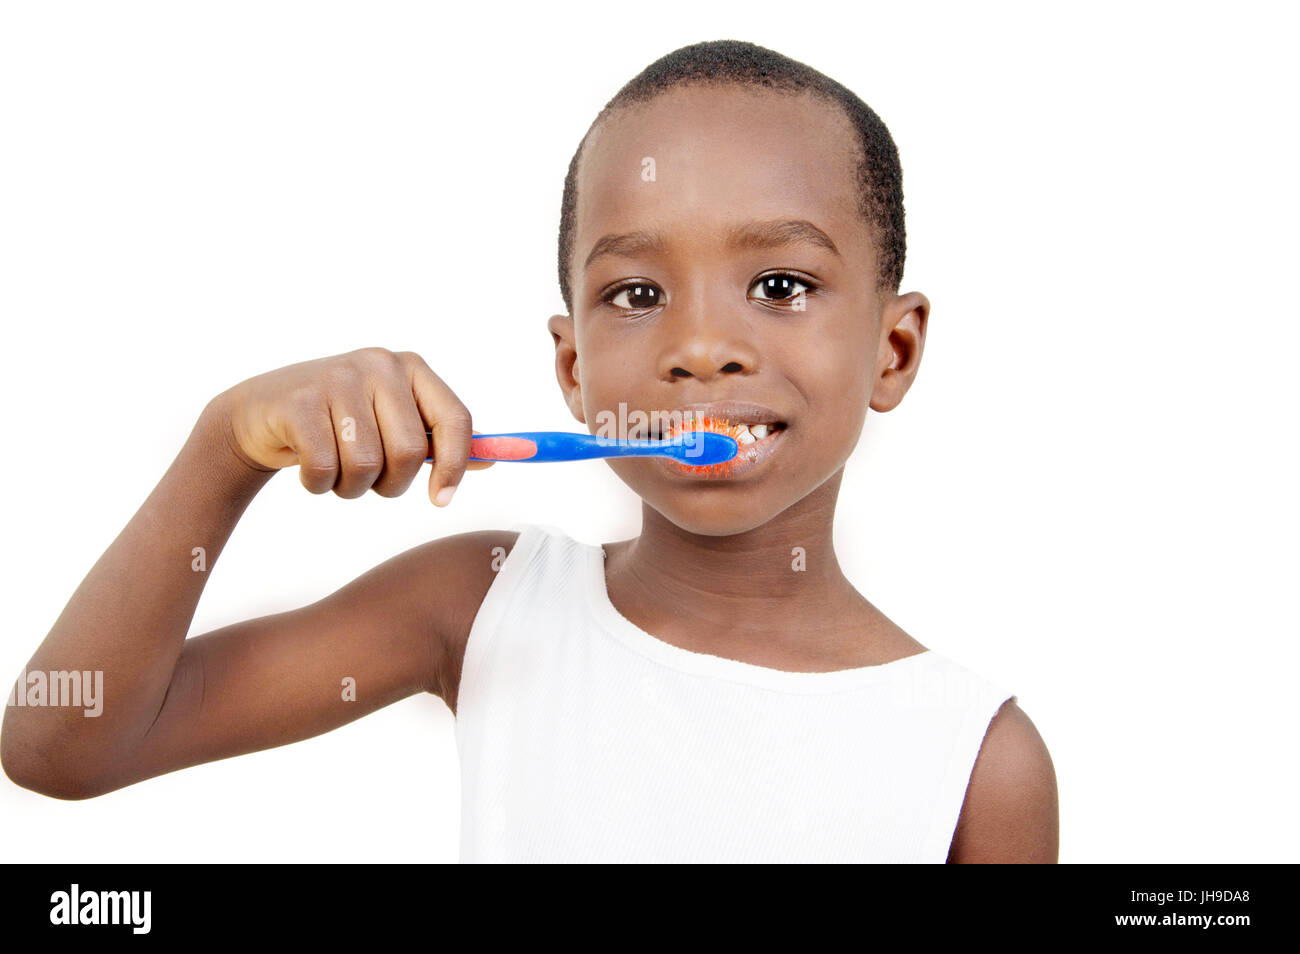 This smiling little boy brushing his teeth. Stock Photo